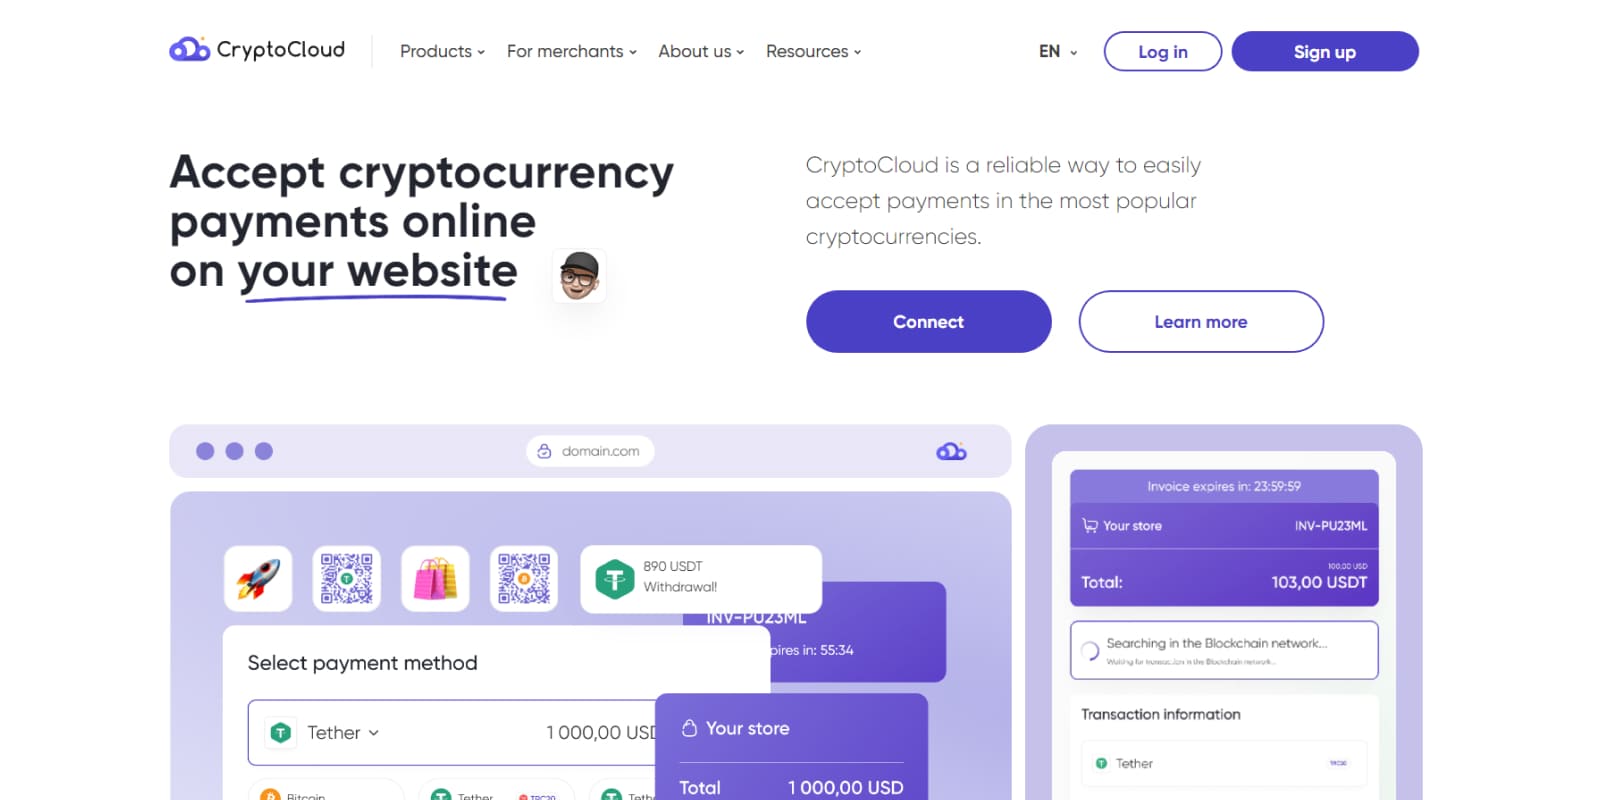 CryptoCloud immediately wins the trust of users with its convenience and ease of use.